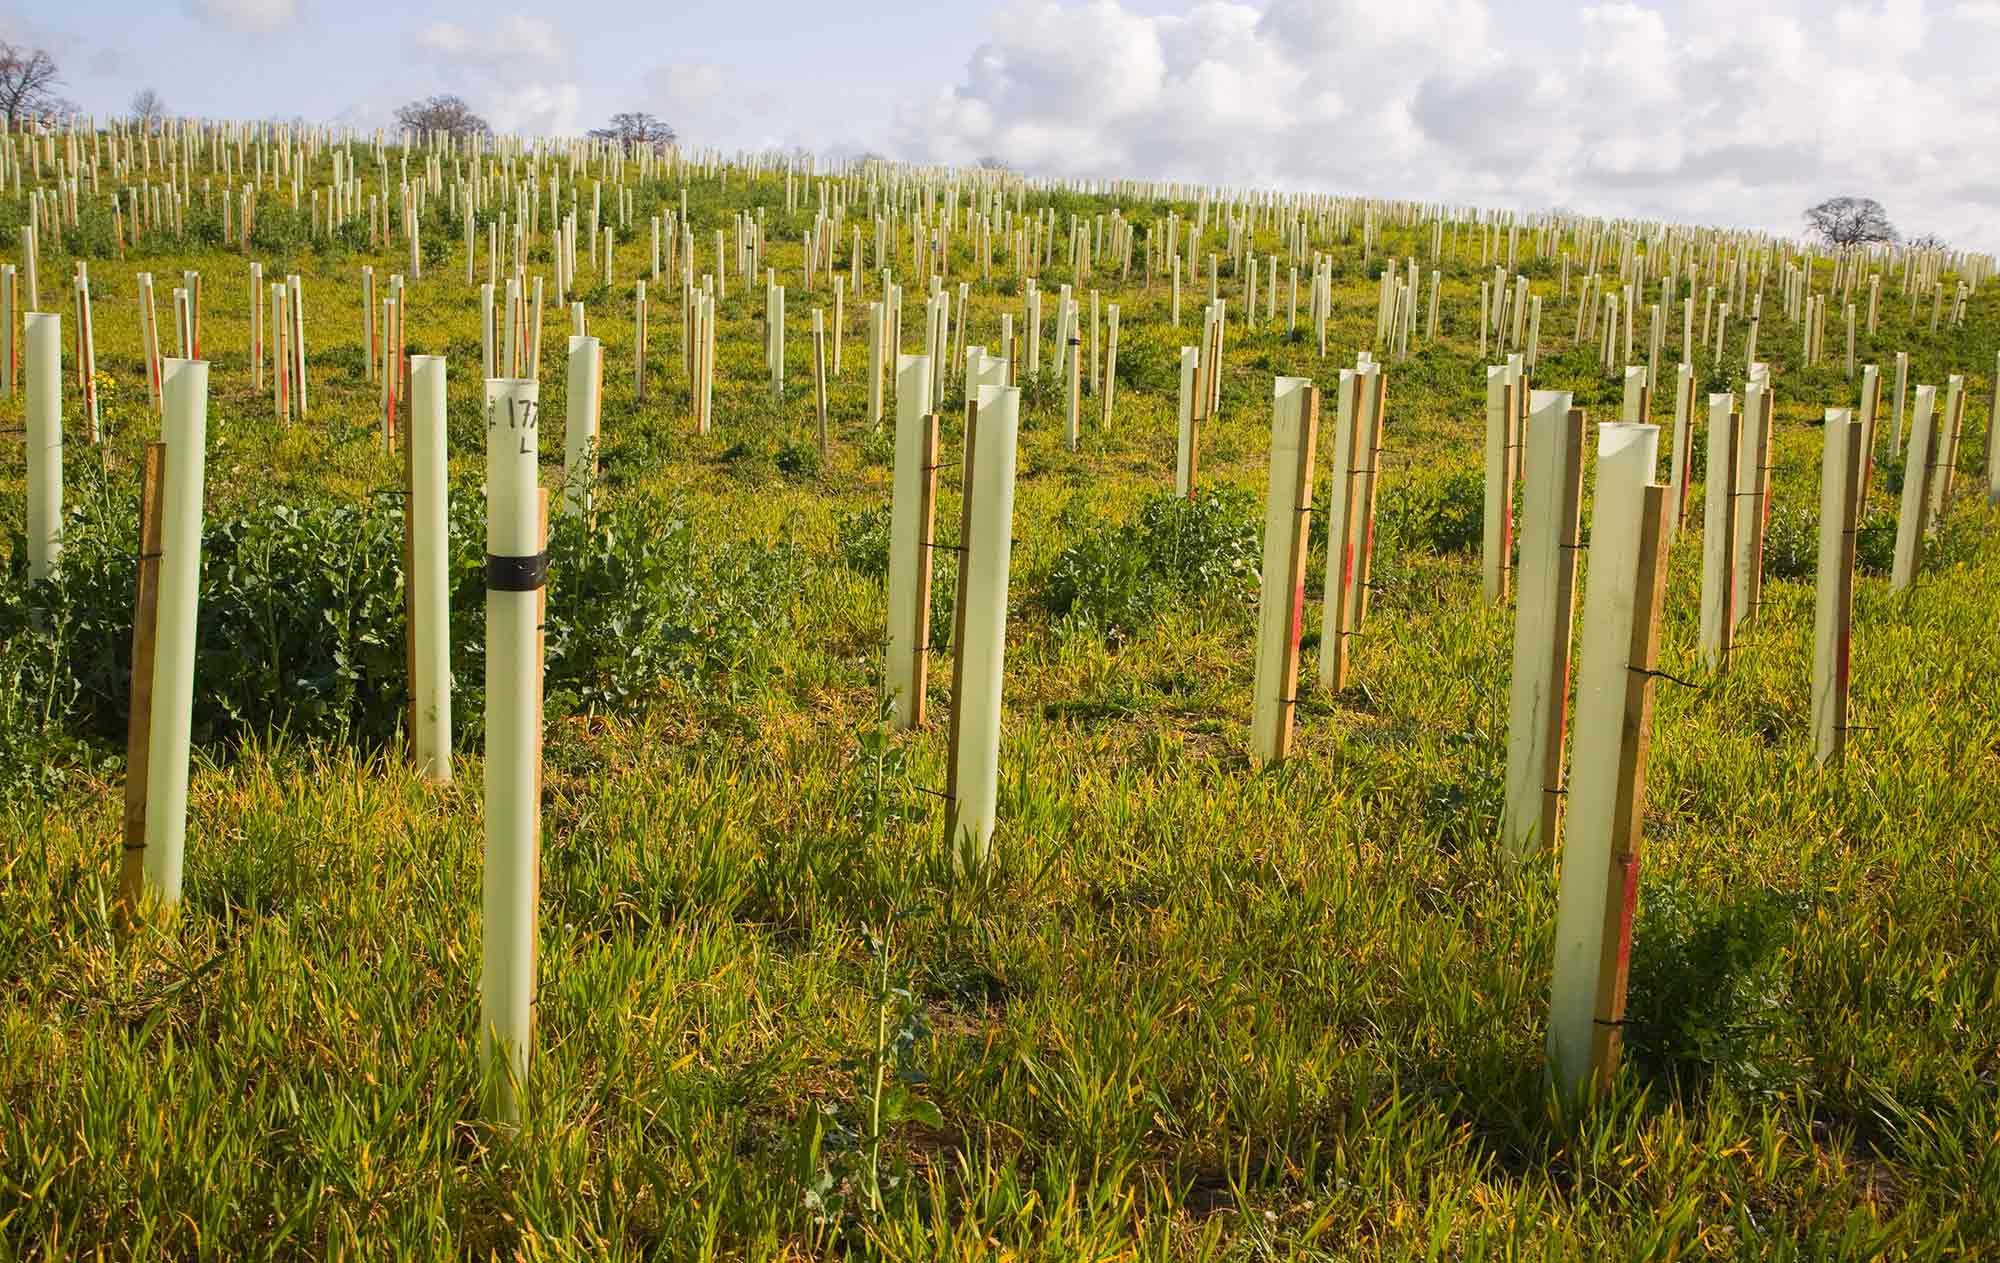 Newly planted field of trees in plastic protective tubes